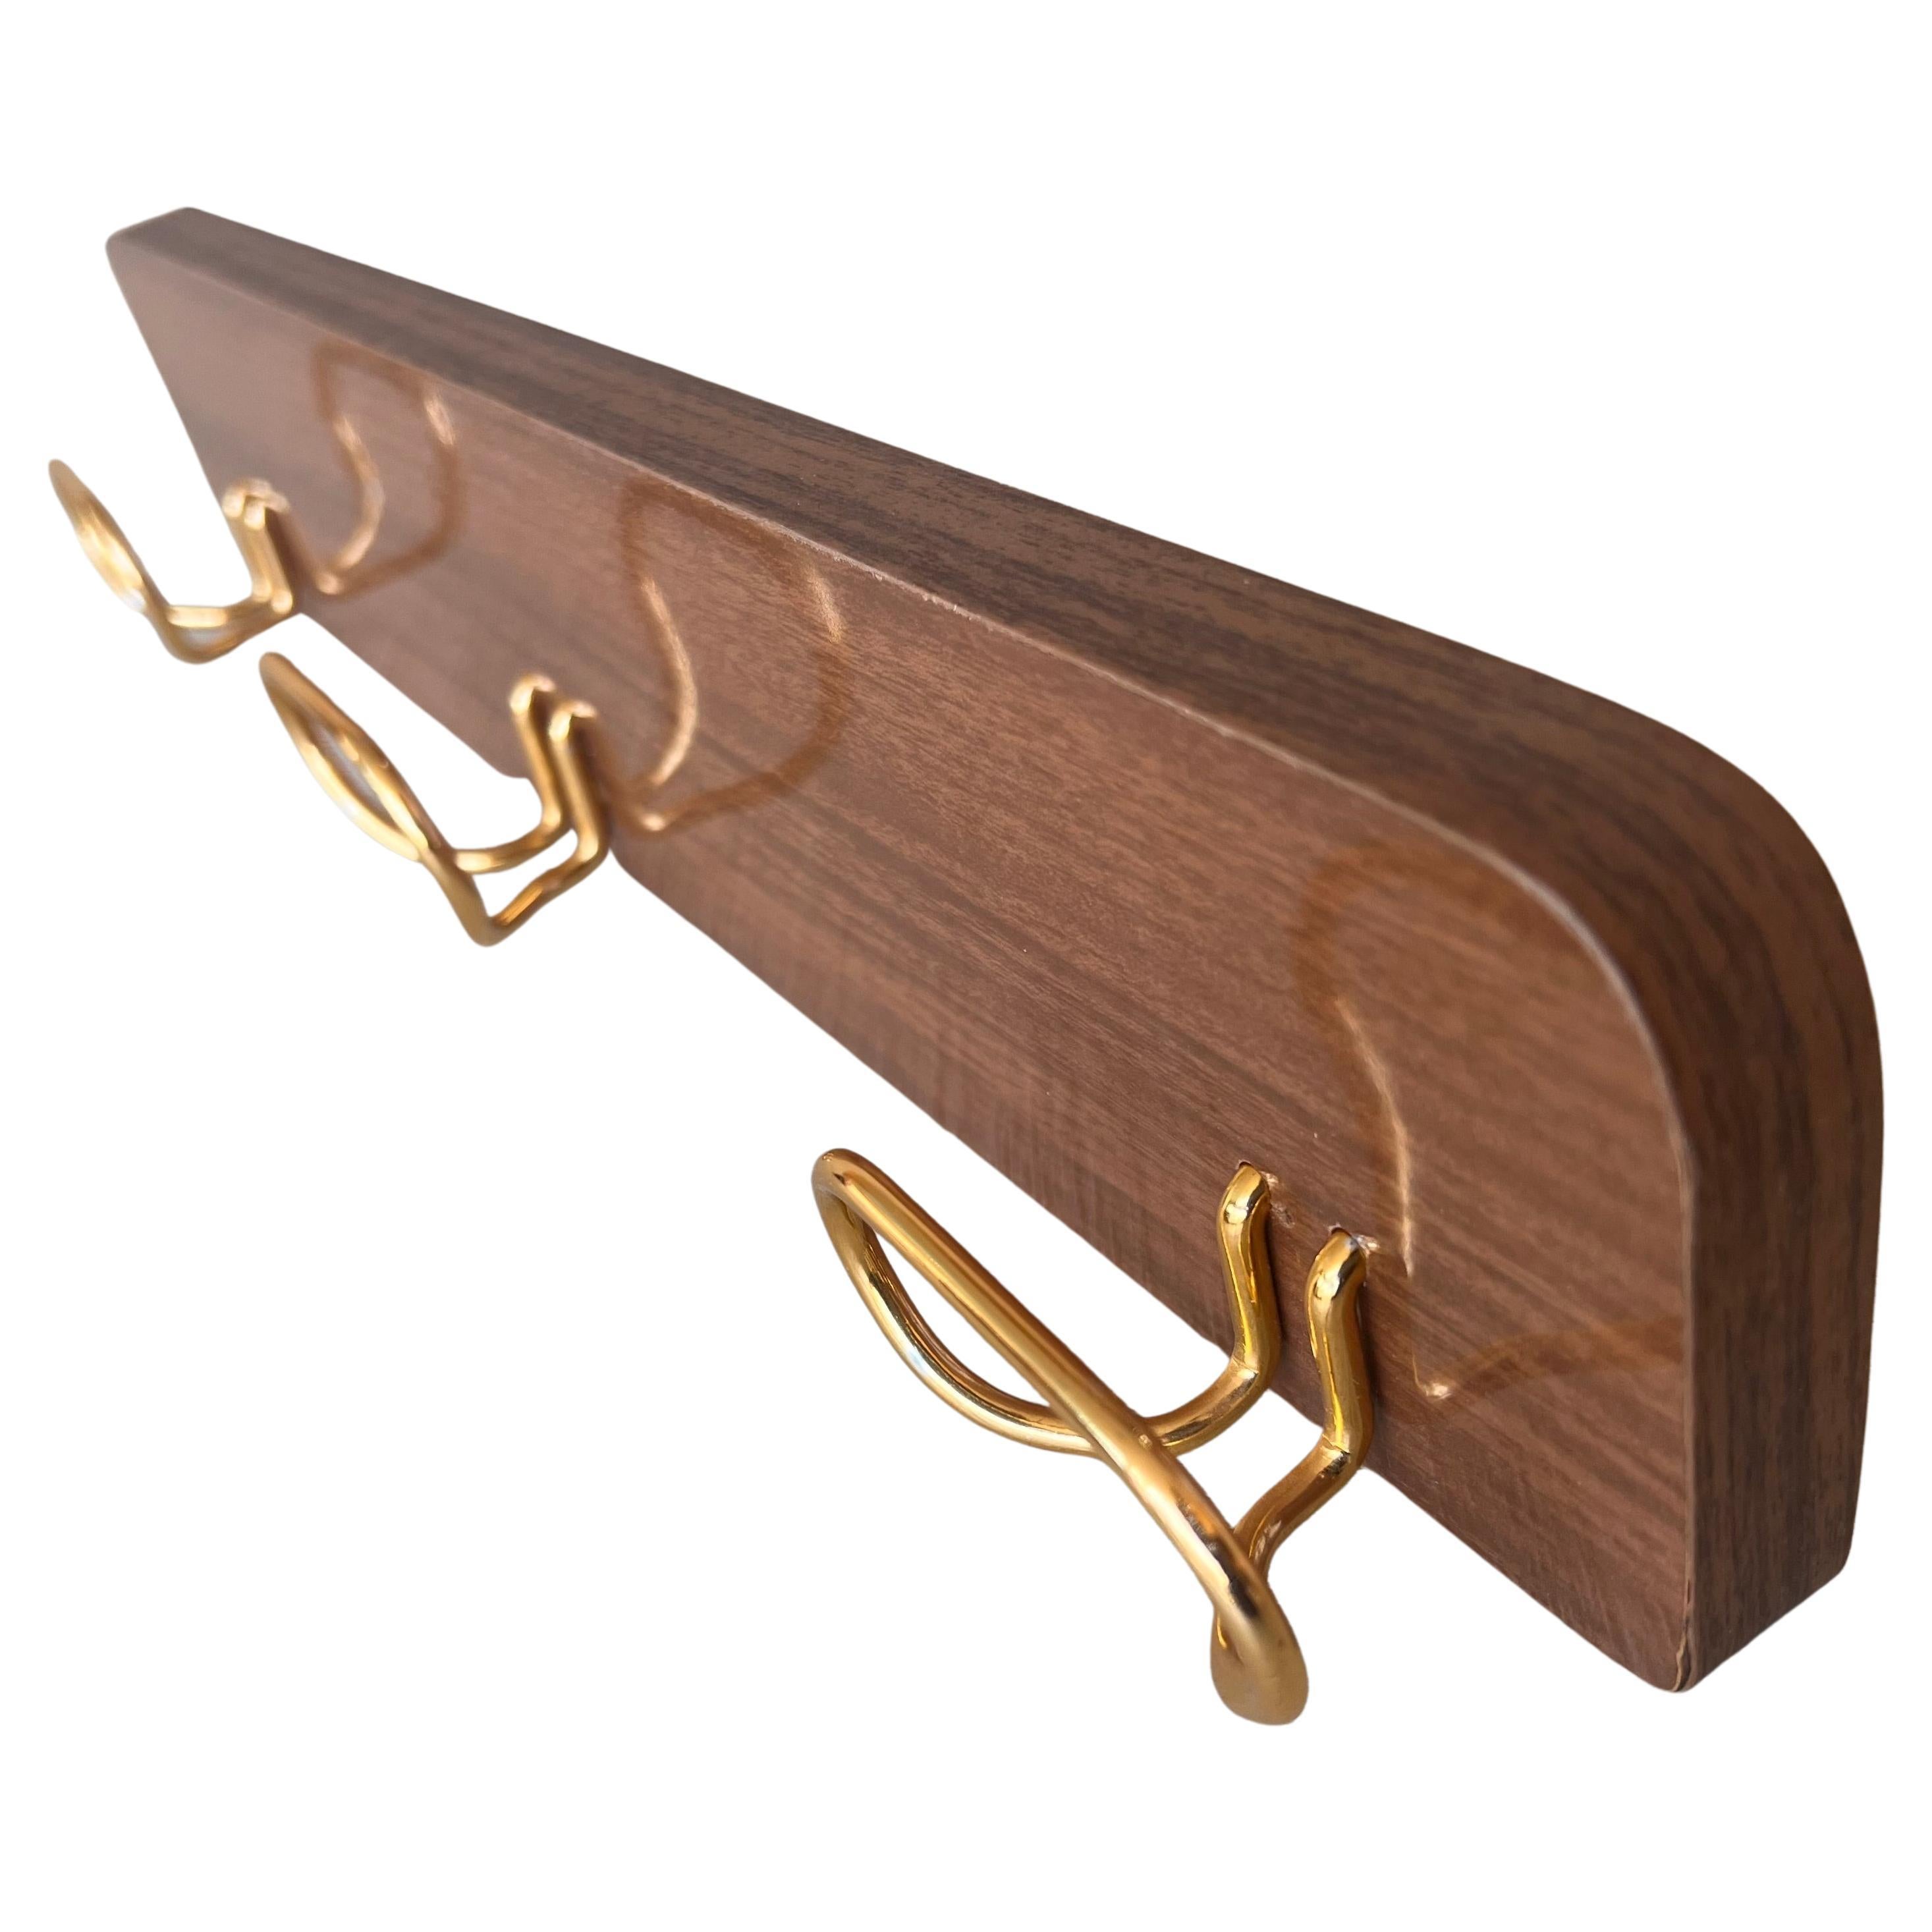 Italian, Mid-Century Modern Wood and Brass Wall Coat Hanger, 1960s For Sale